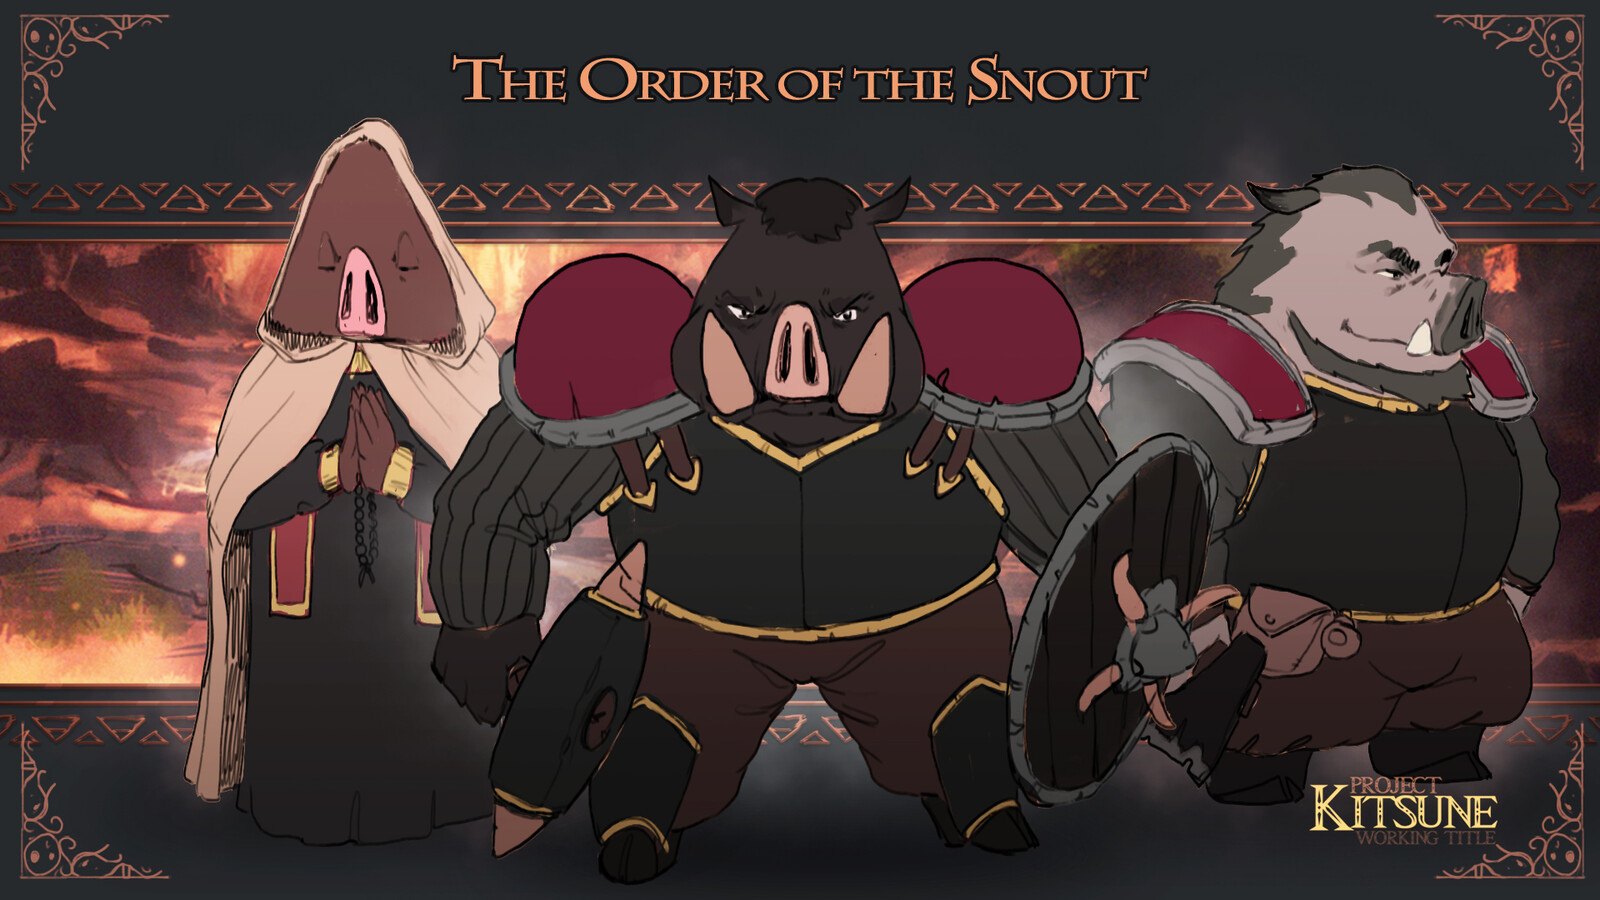 Concepts for 'The Order of the Snout', a group of religious fanatic boars.